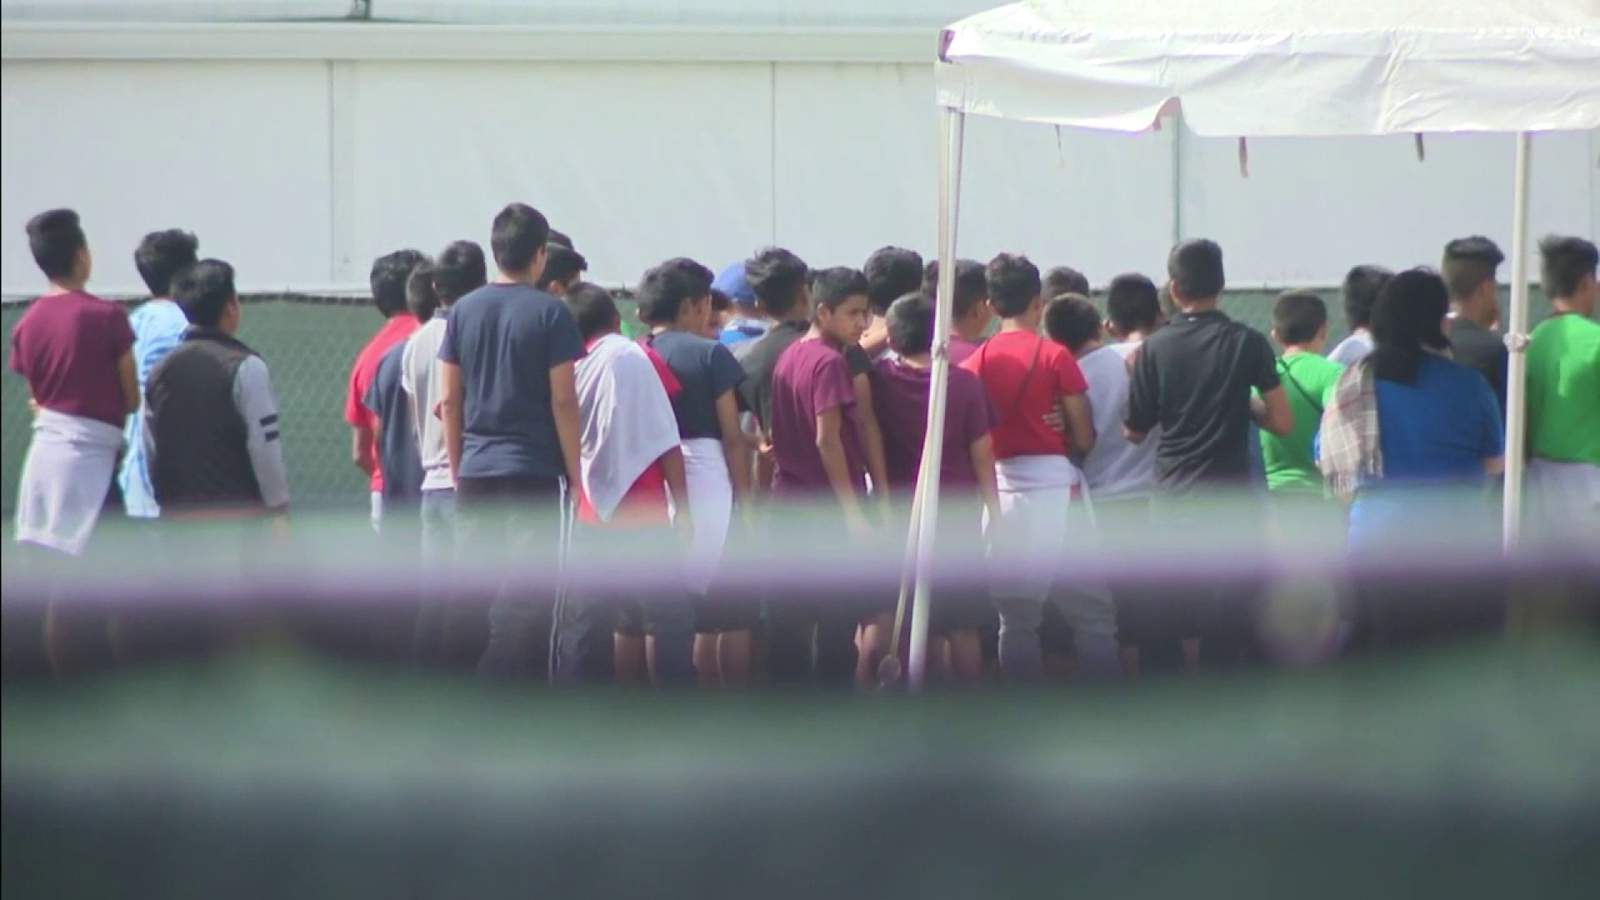 White House on returning migrant kids to Homestead: ‘It’s not a detention center; it’s a shelter’